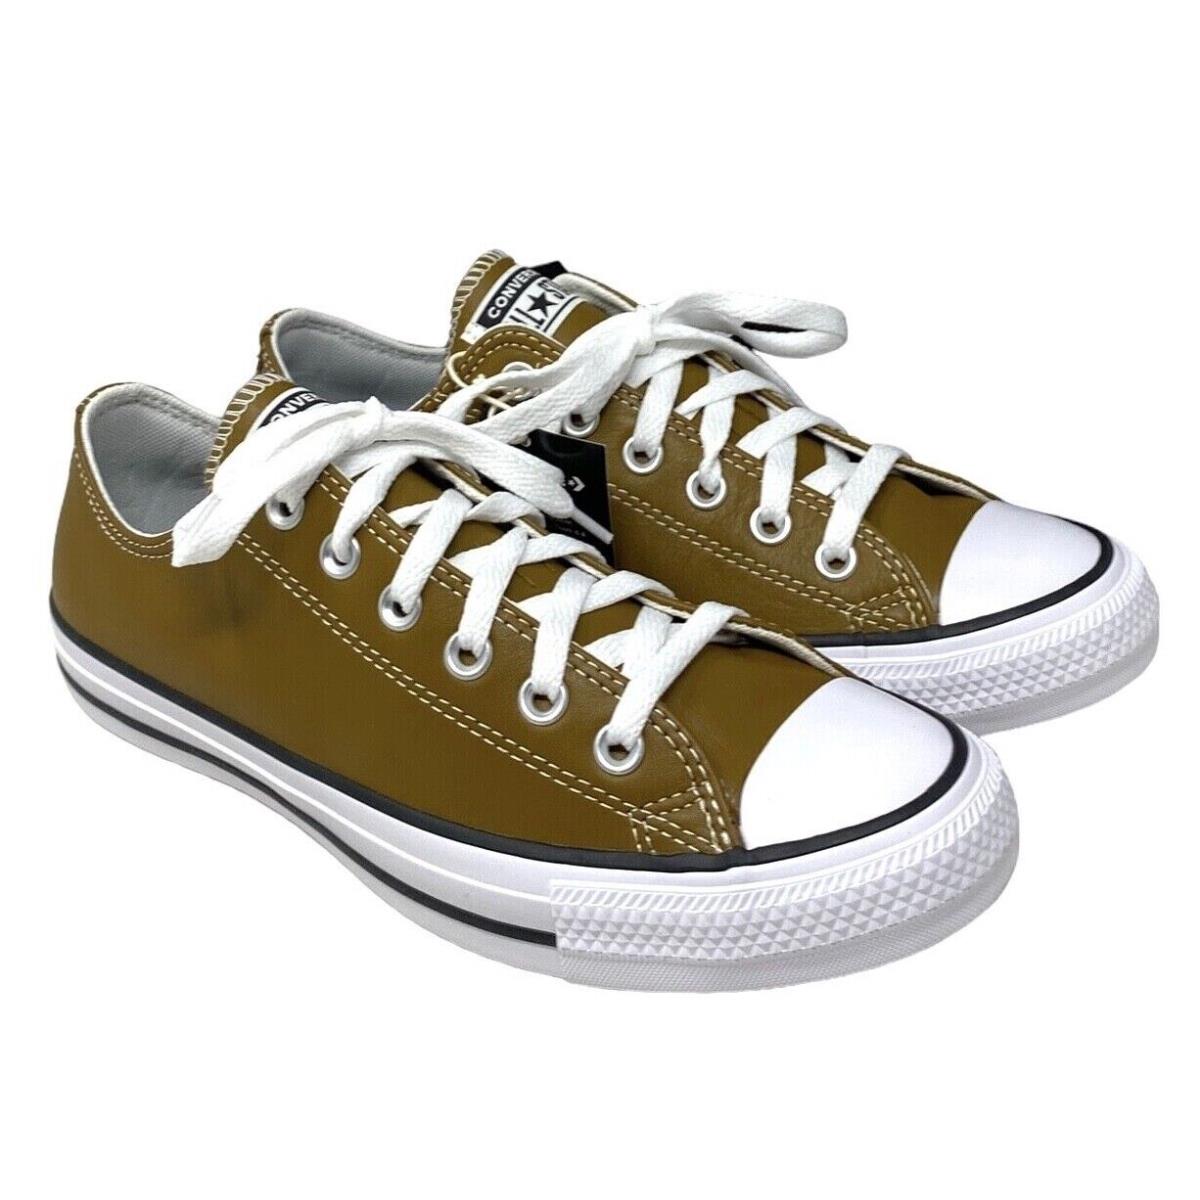 Converse Ctas OX Low Sneakers Skate Leather Brown For Women Shoes Casual A09977C